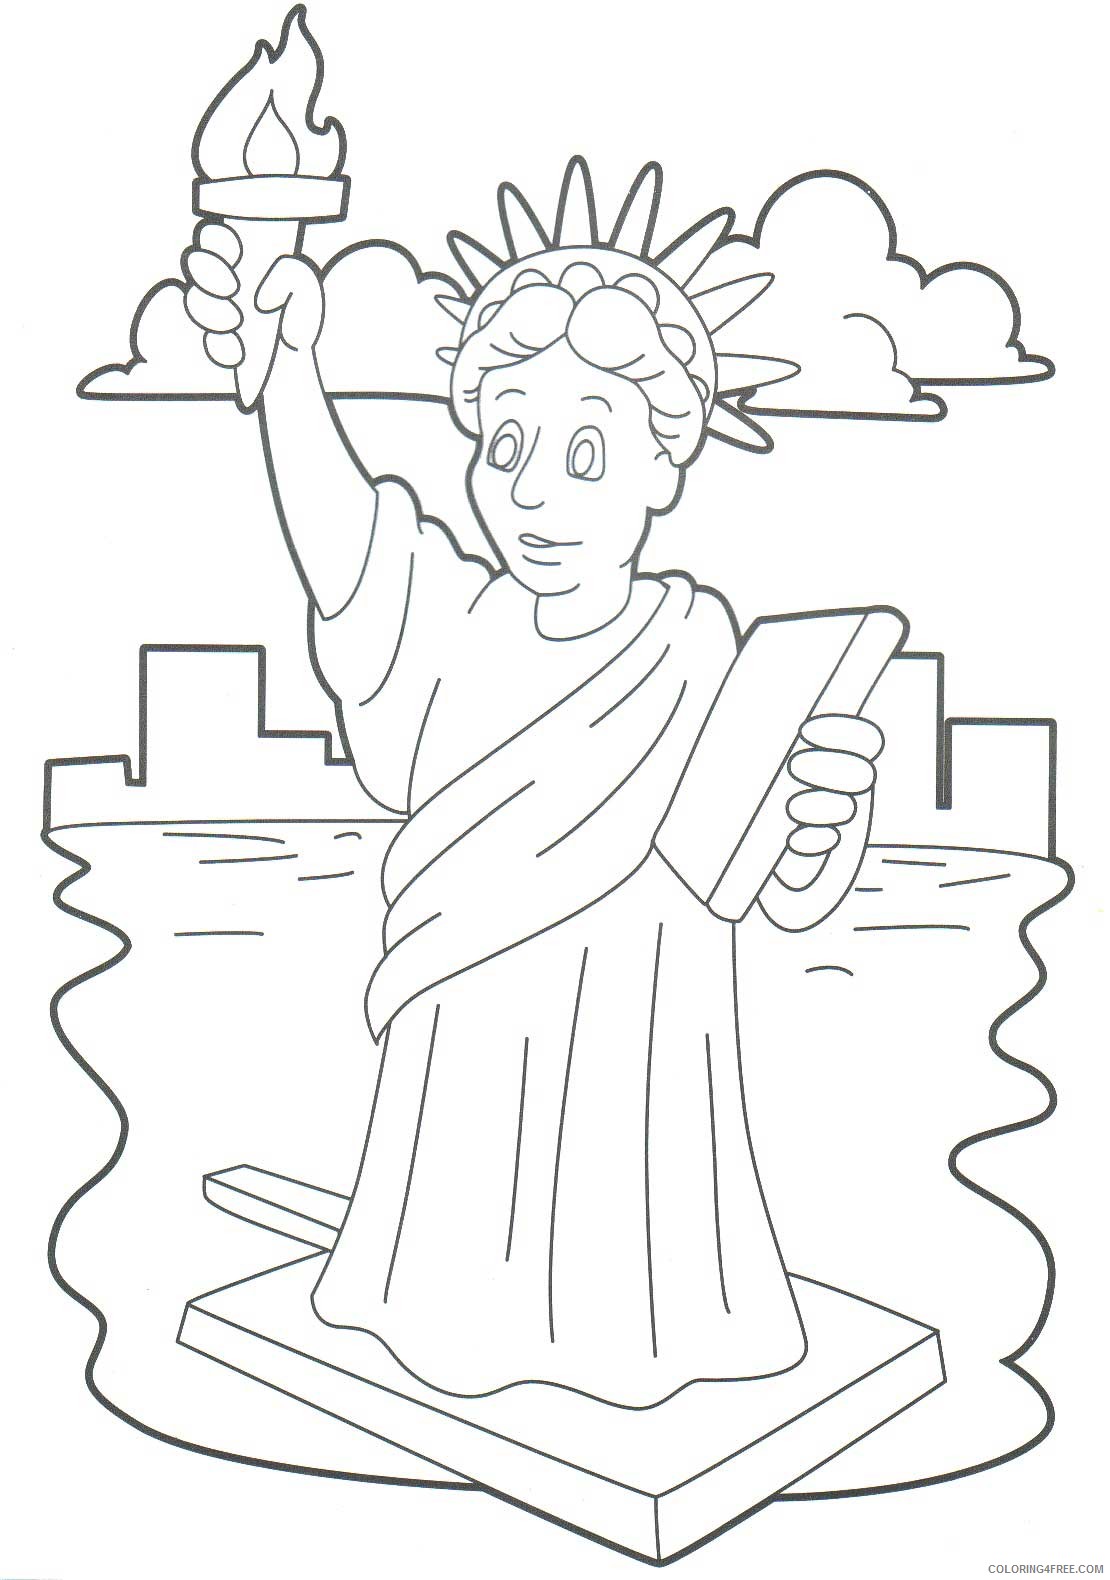 printable statue of liberty coloring pages for kids Coloring4free